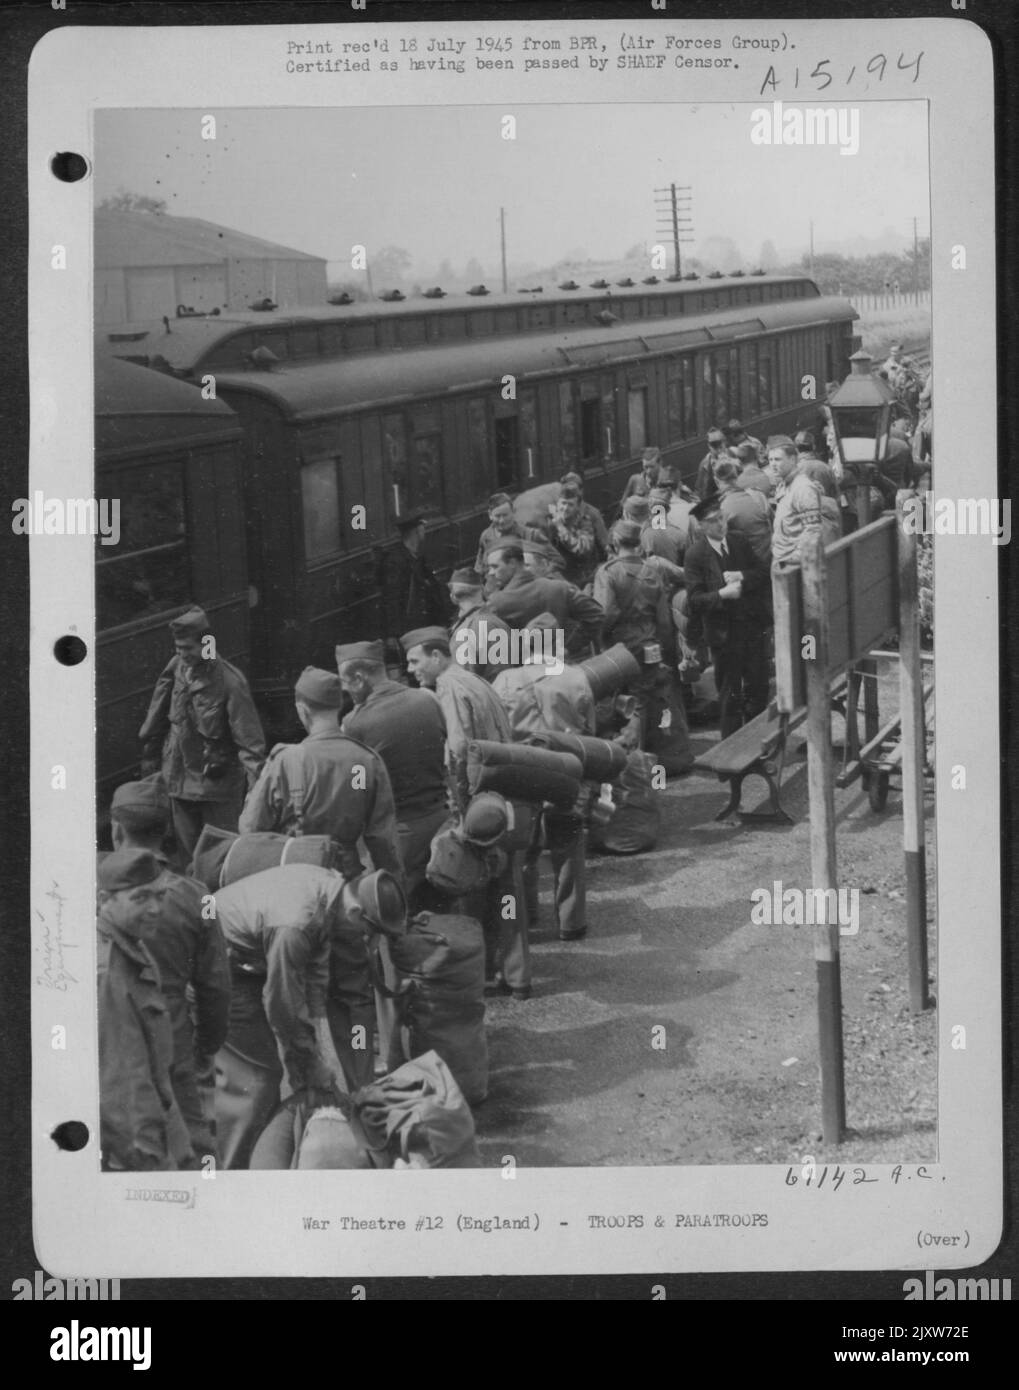 On The Platform, The Train Guard, Ticket Collector And A U.S. Transportation Corpsman Shepherd The Men And Their Bulky Equipment Aboard. This Is One Journey They Will All Agree Is 'Really Necessary'. This Train Will Take Them To Greenock, Scotland, Wher Stock Photo